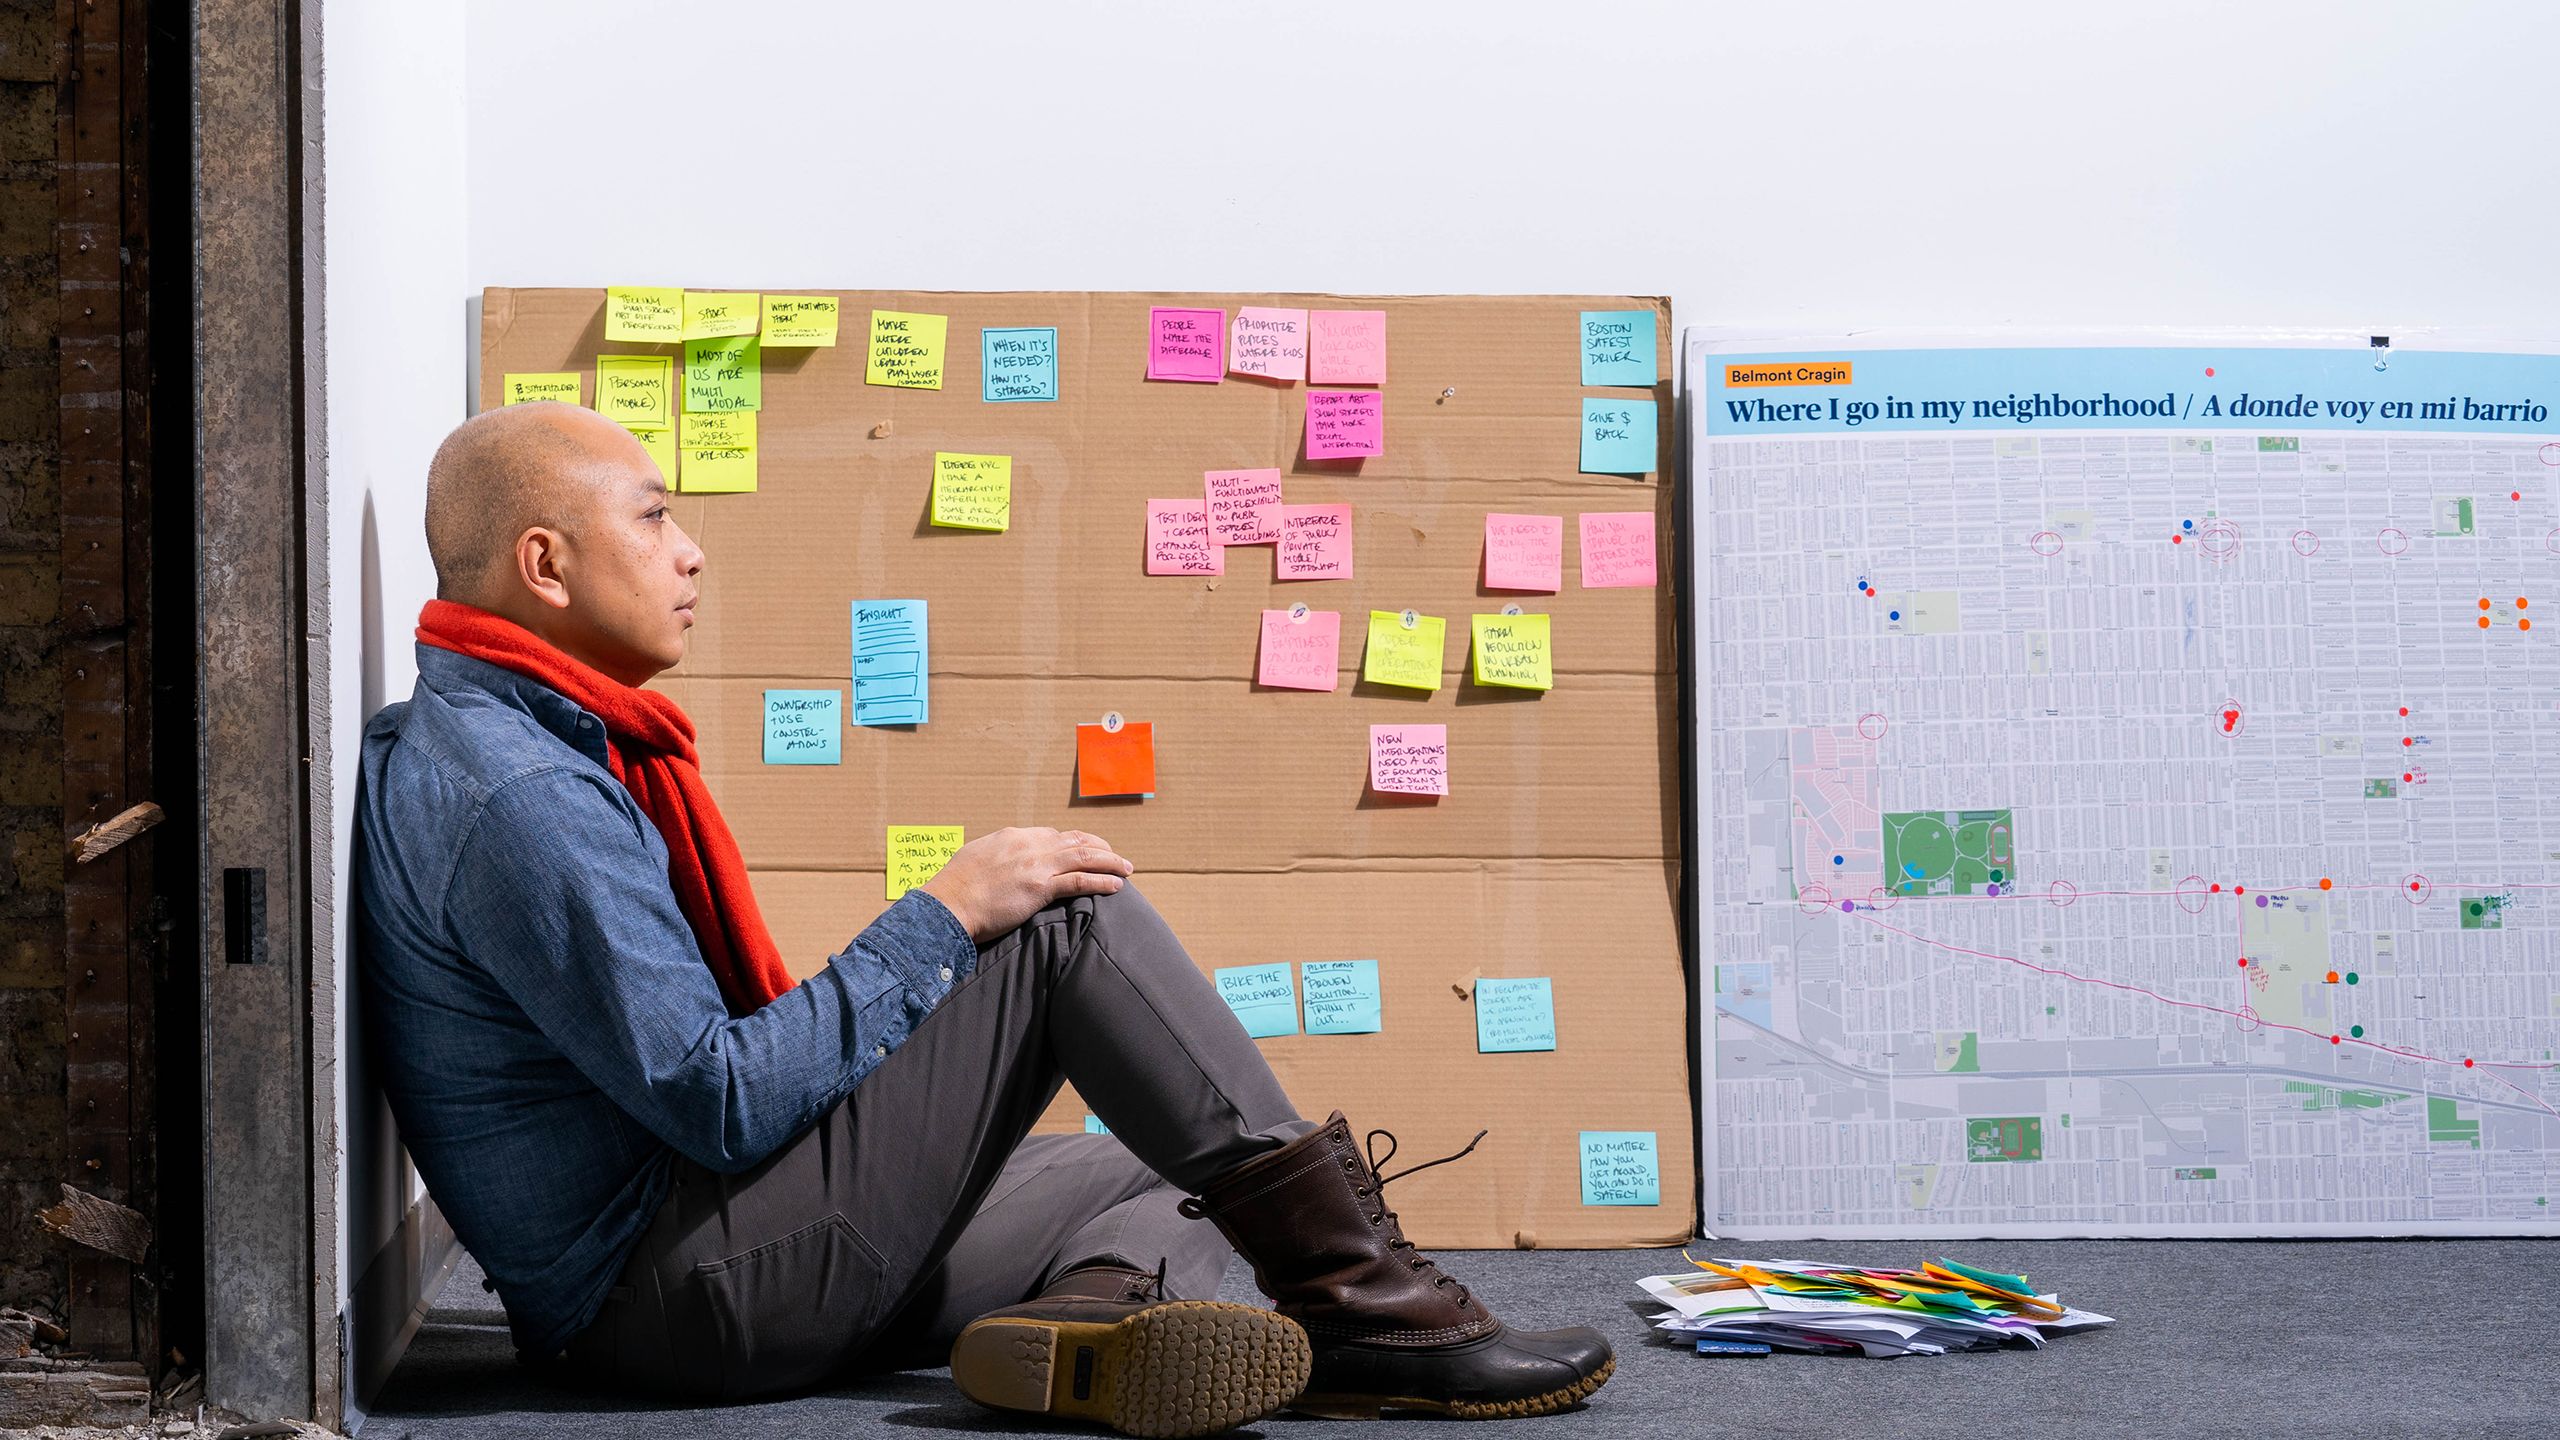 A man in a red scarf and blue shirt sits on the floor of an office space next to a cardboard board with colorful post-its and a neighborhood map